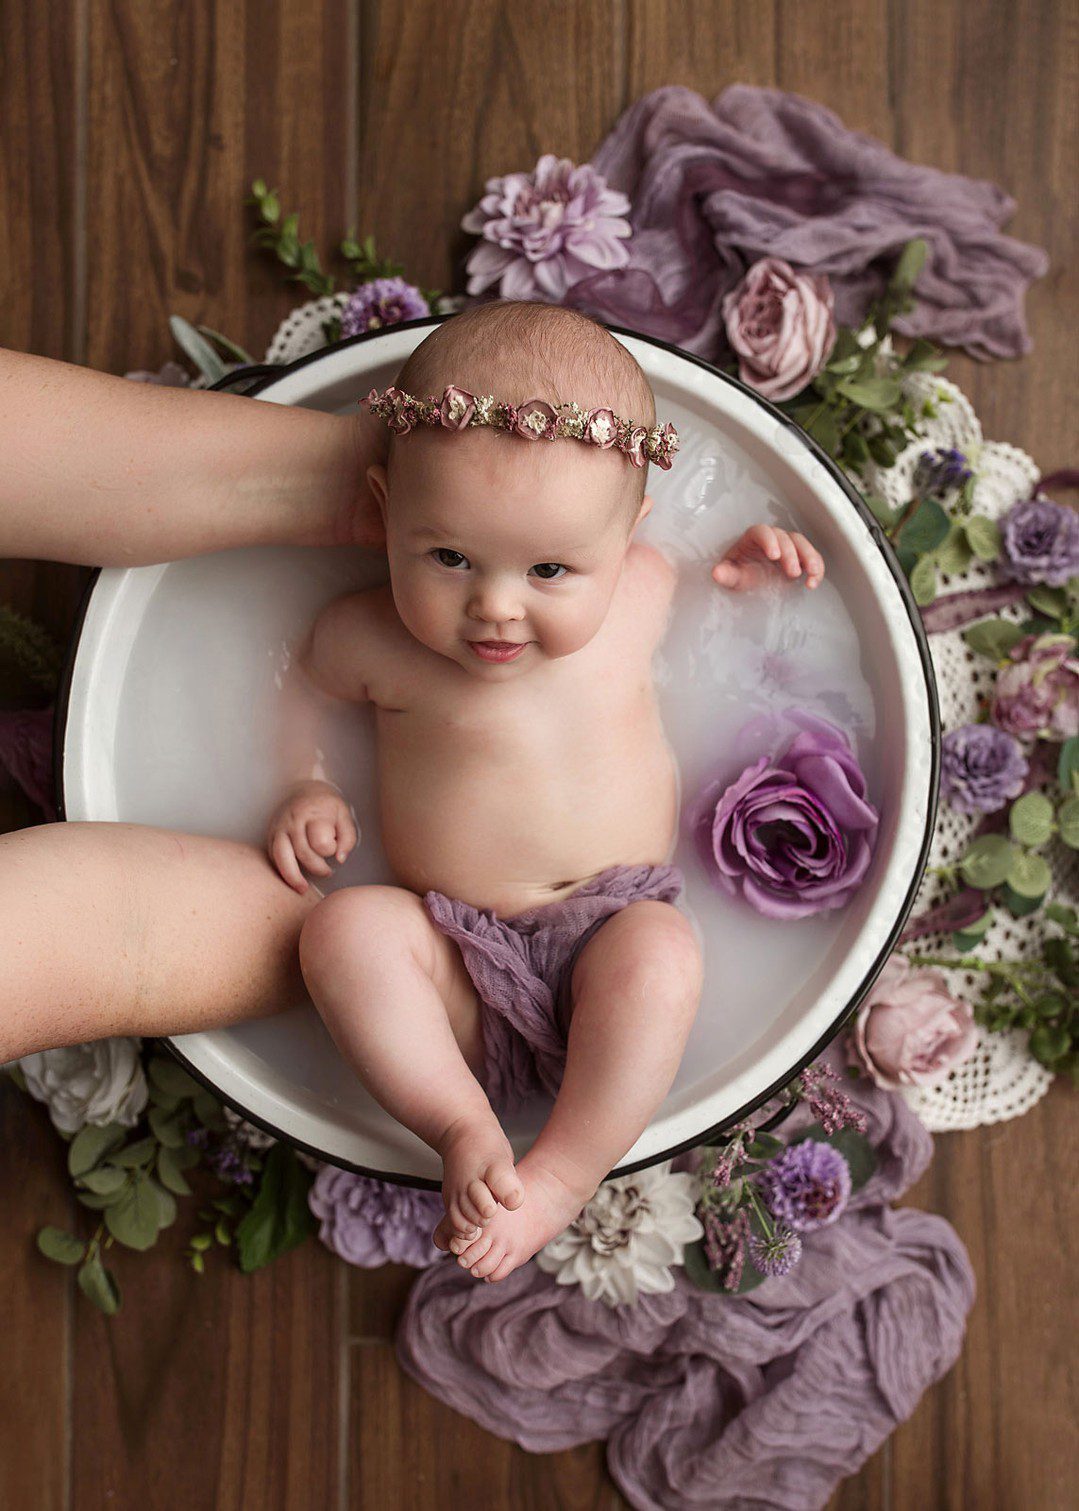 Child Milestone Photography such as milk baths done at 3-4 months, sitter sessions and cake smash sessions. Done by Tucson Photographer Vanessa Koza Photography